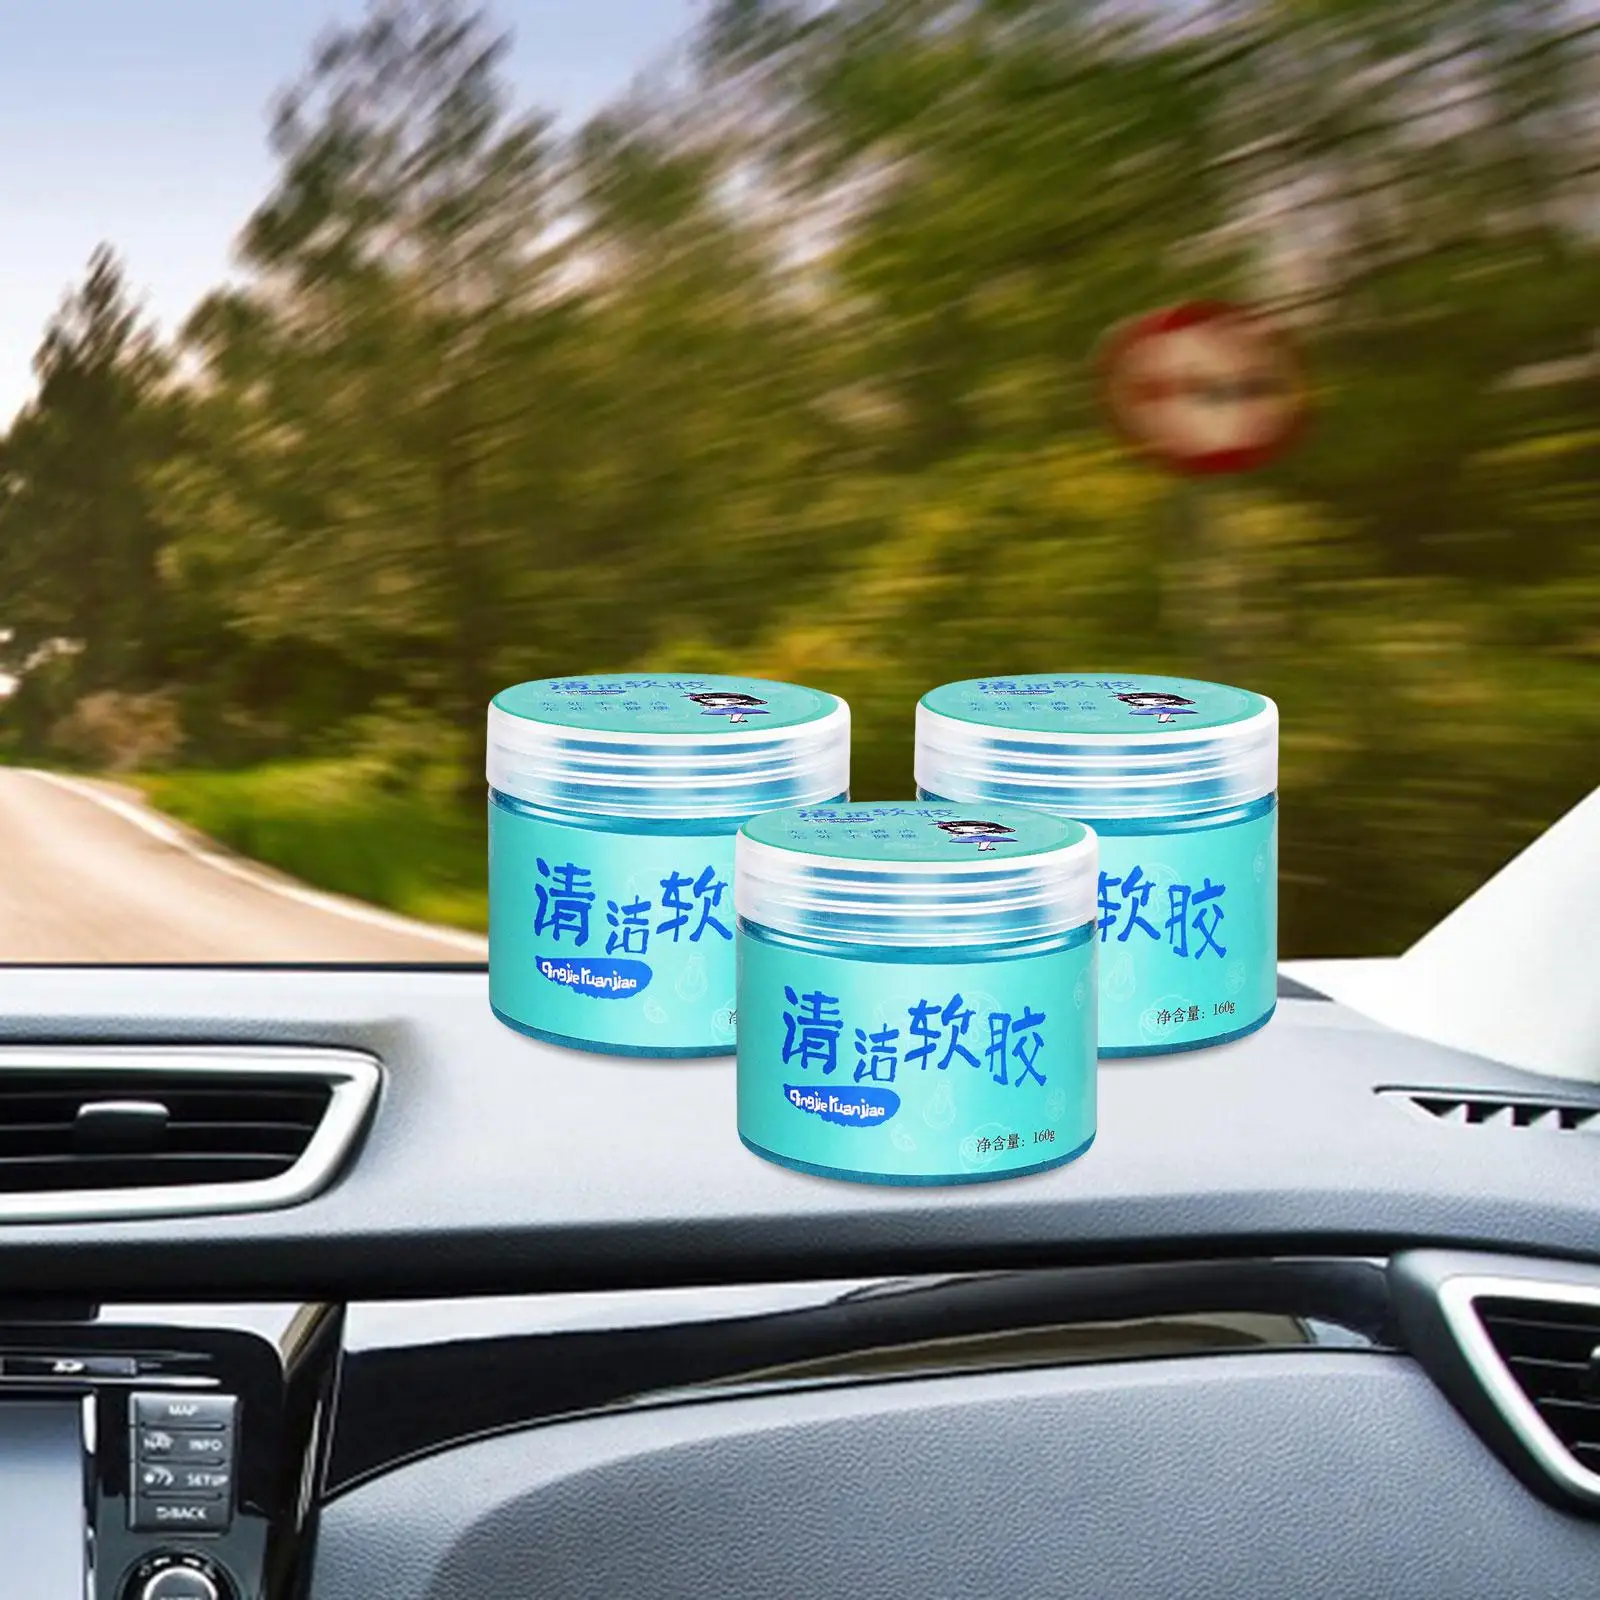 Dust Cleaning Mud Universal Auto Detailing Tools Car Cleaner Putty Interior Computer Dust Remover for Air Vents Camera PC